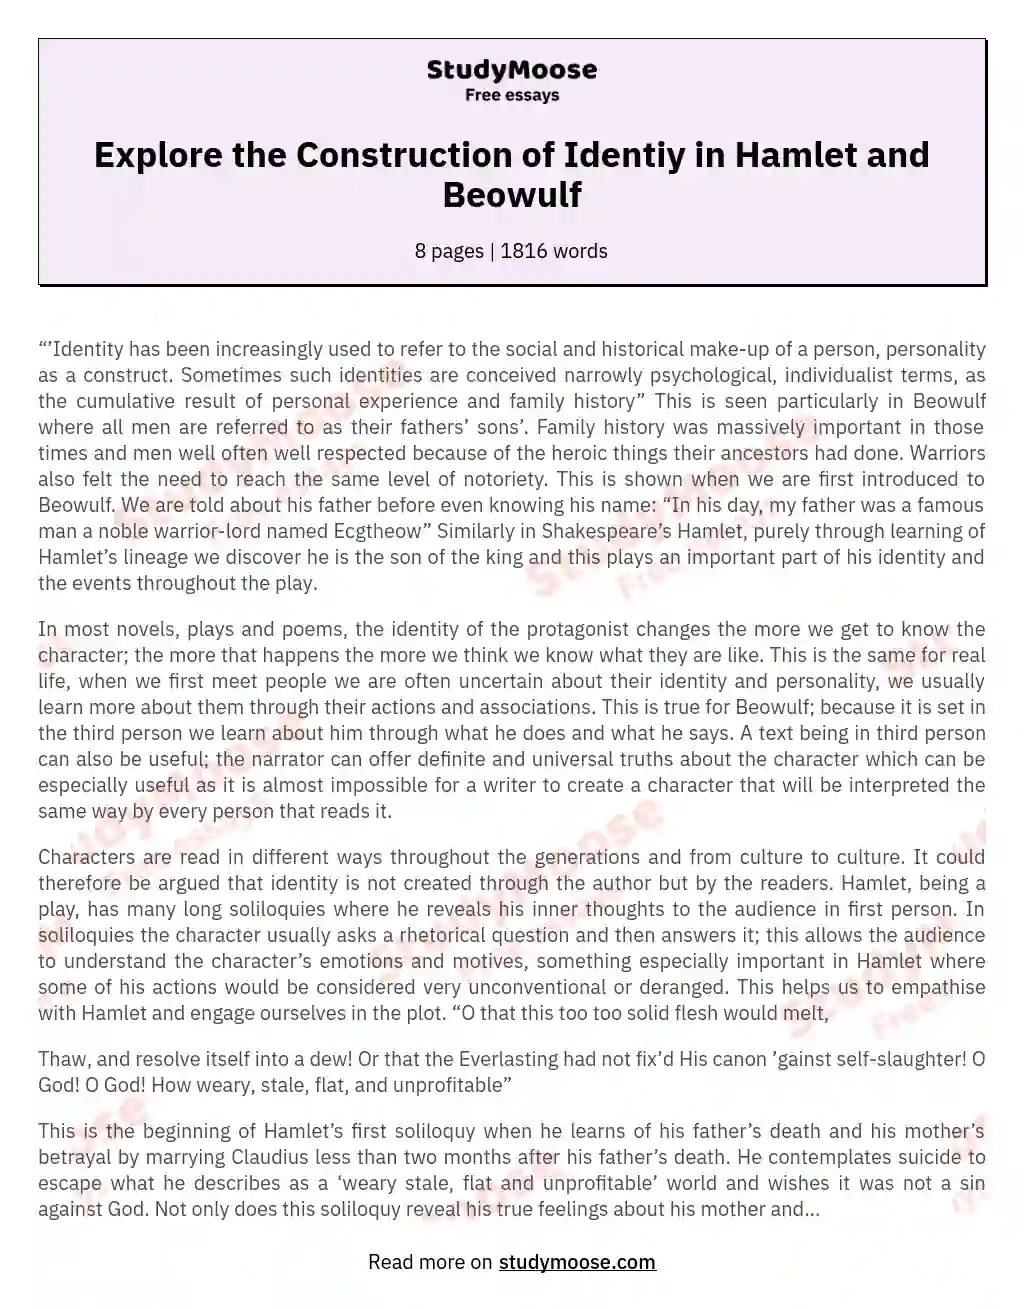 Explore the Construction of Identiy in Hamlet and Beowulf